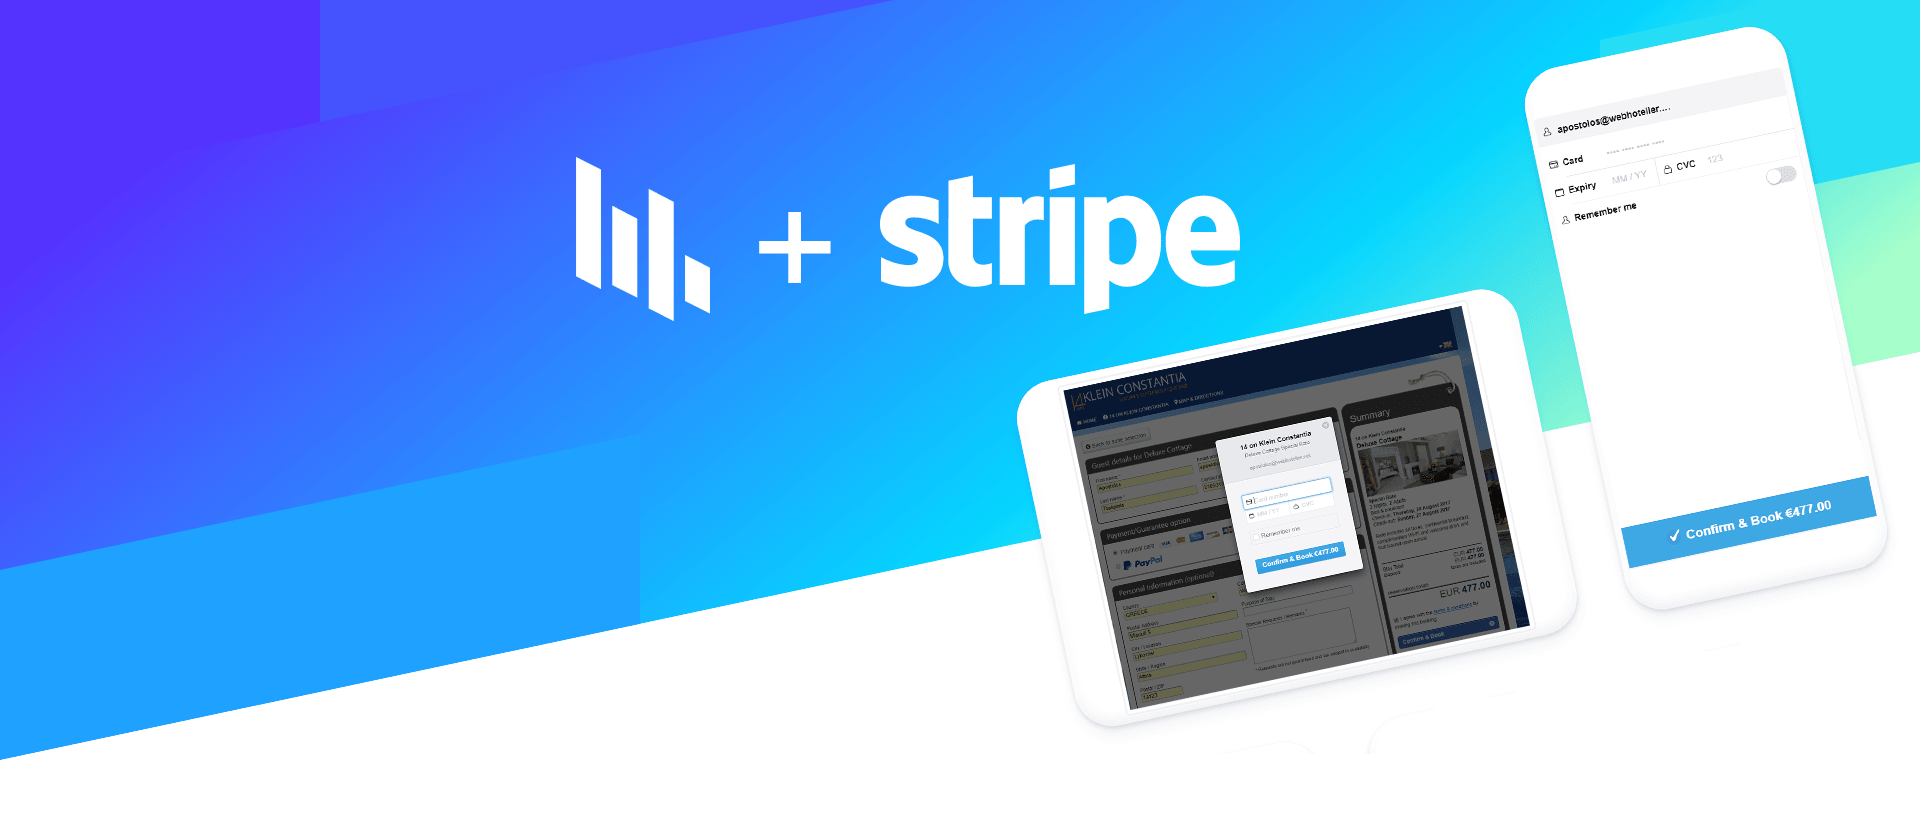 WebHotelier adds Stripe Payments support